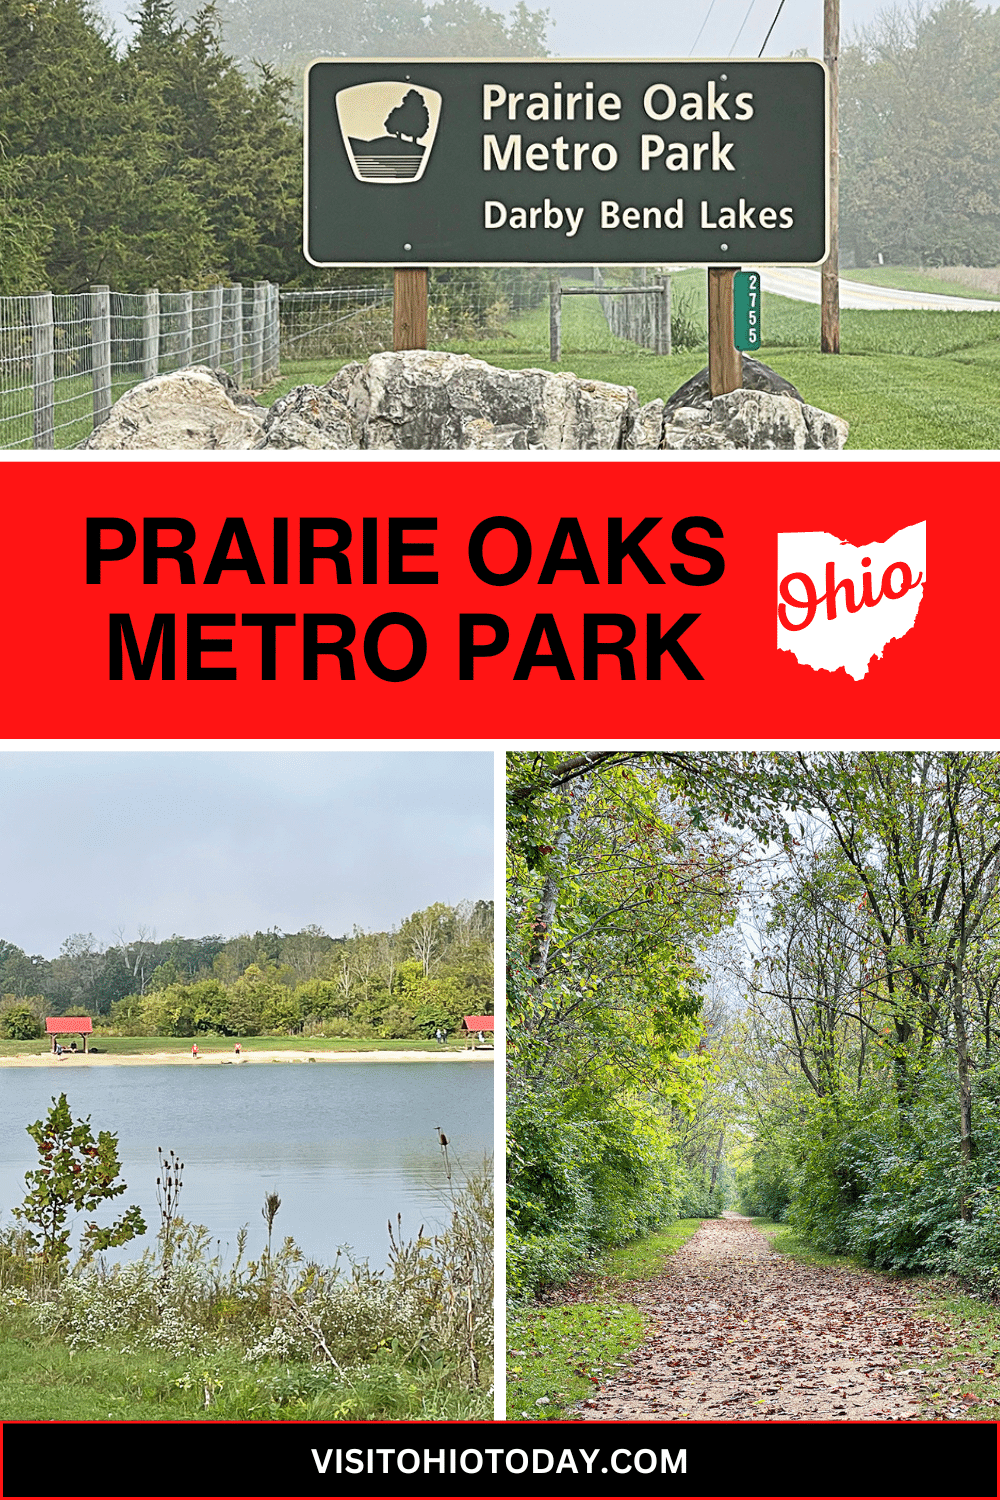 Prairie Oaks Metro Park features nearly 500 acres of beautiful prairies within the total park area of 2,203 acres. There is something for everyone here, whether you wish to go bird-spotting, hiking, or have a picnic.